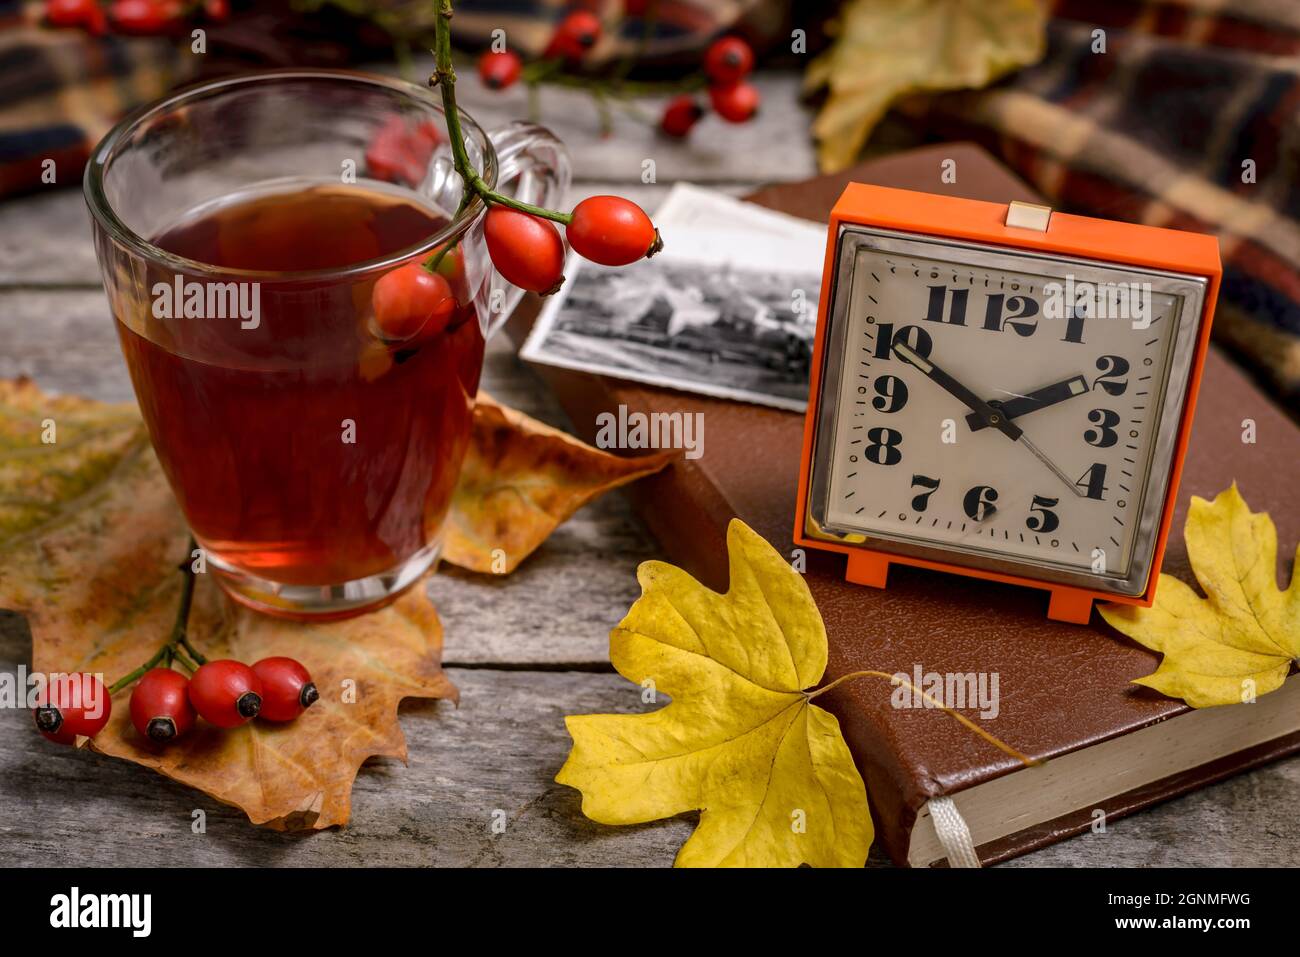 A cup of rose hip tea with fresh rose hips, vintage clock, old photographs, book and autumn leaves on wooden table. Autumn concept, selective focus. Stock Photo